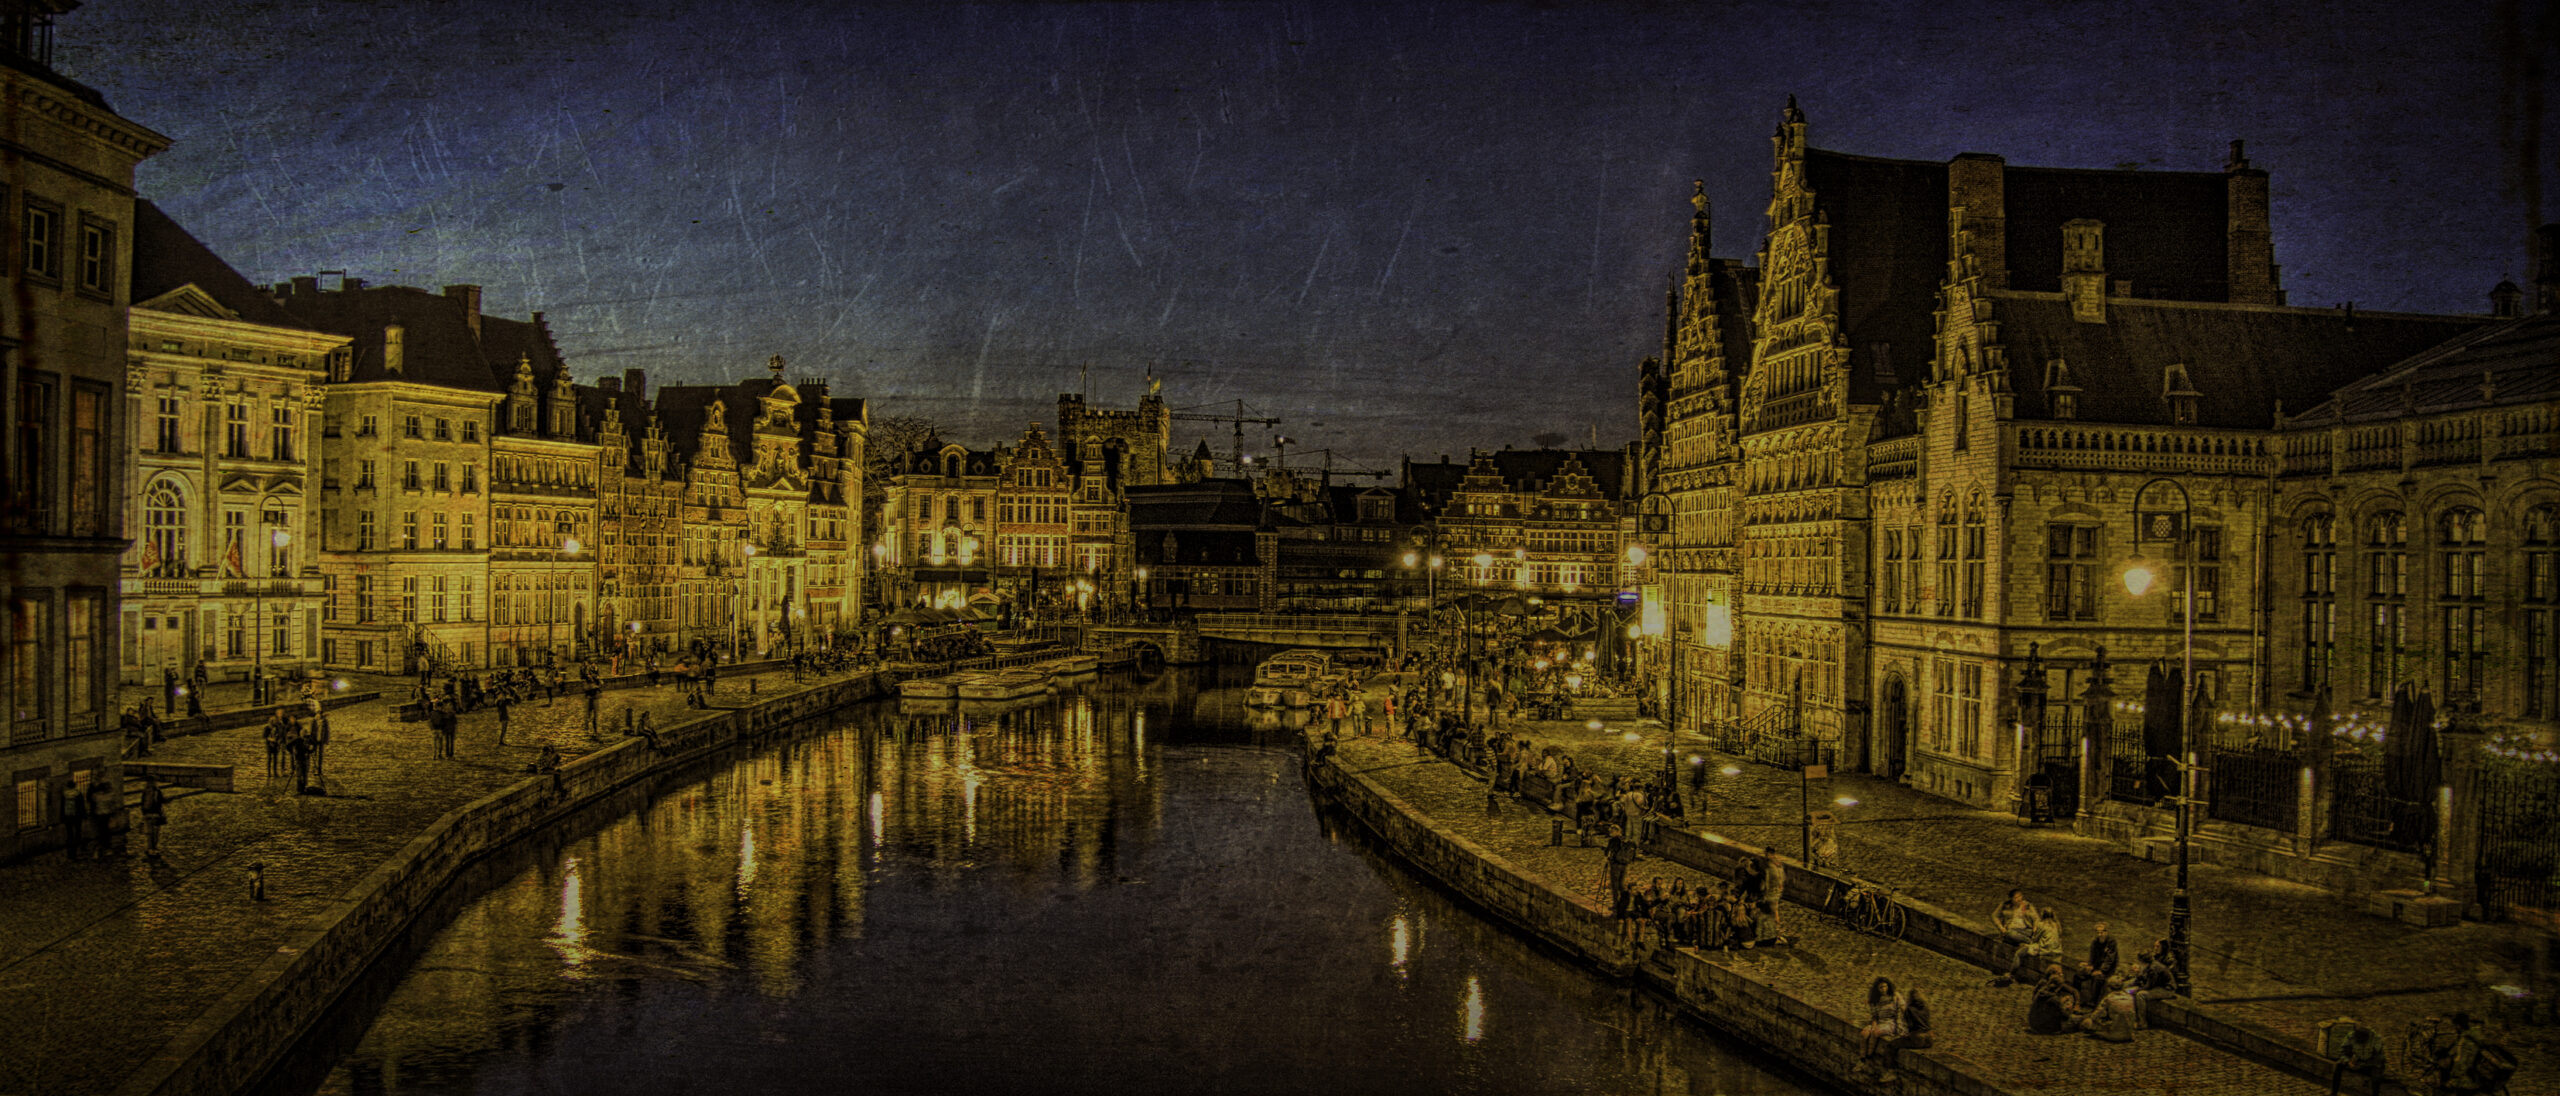 A night view of a canal in Ghent, Belgium